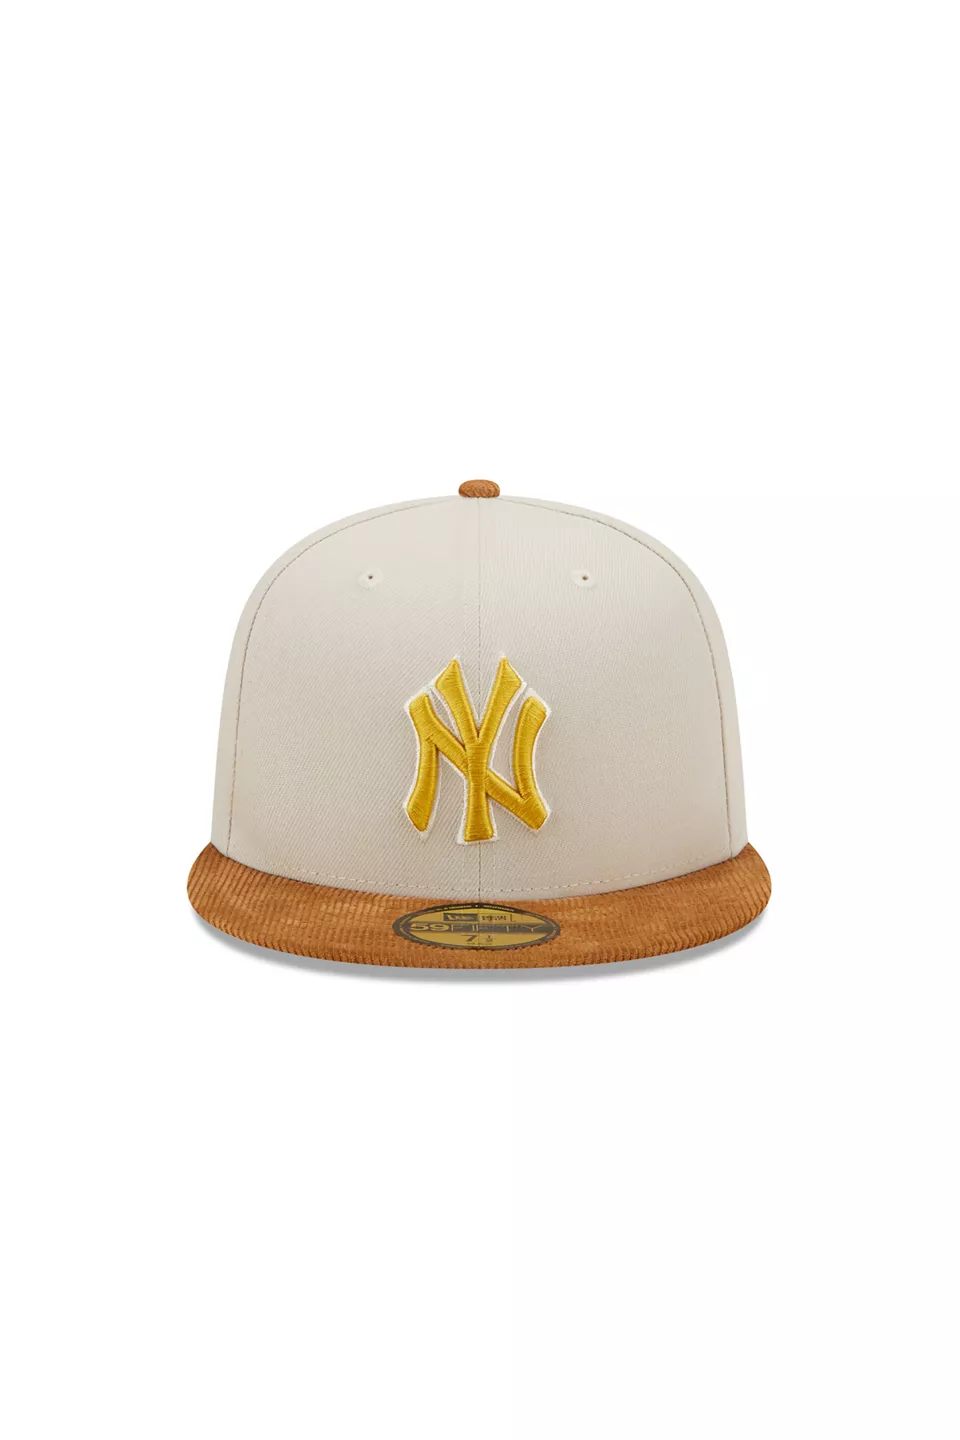 NEW YORK YANKEES CORD VISOR 59FIFTY FITTED HAT (CORDUROY BRIM)